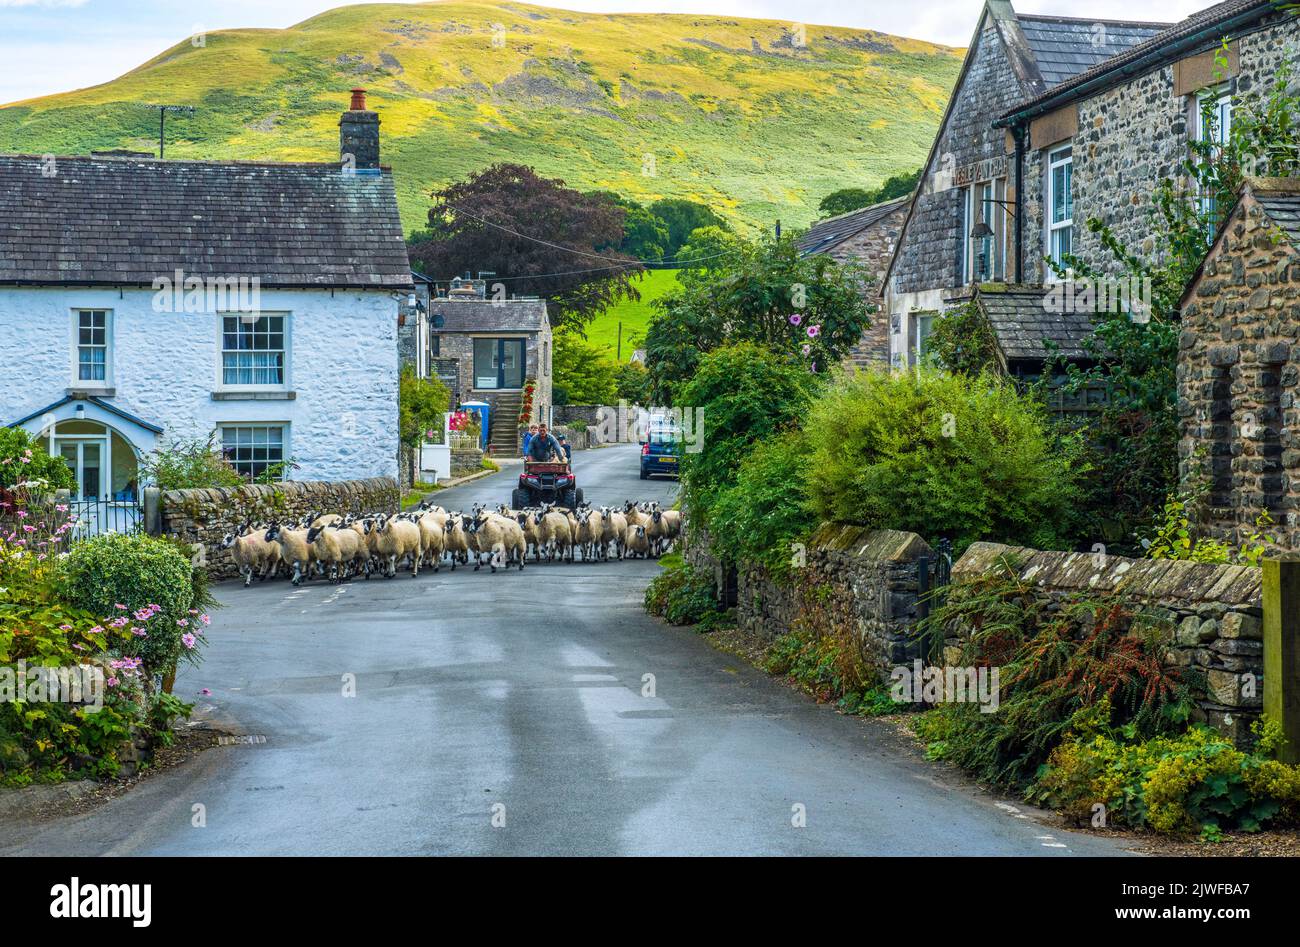 A flock of sheep being herded through the village of Barbon in Cumbria in September Stock Photo